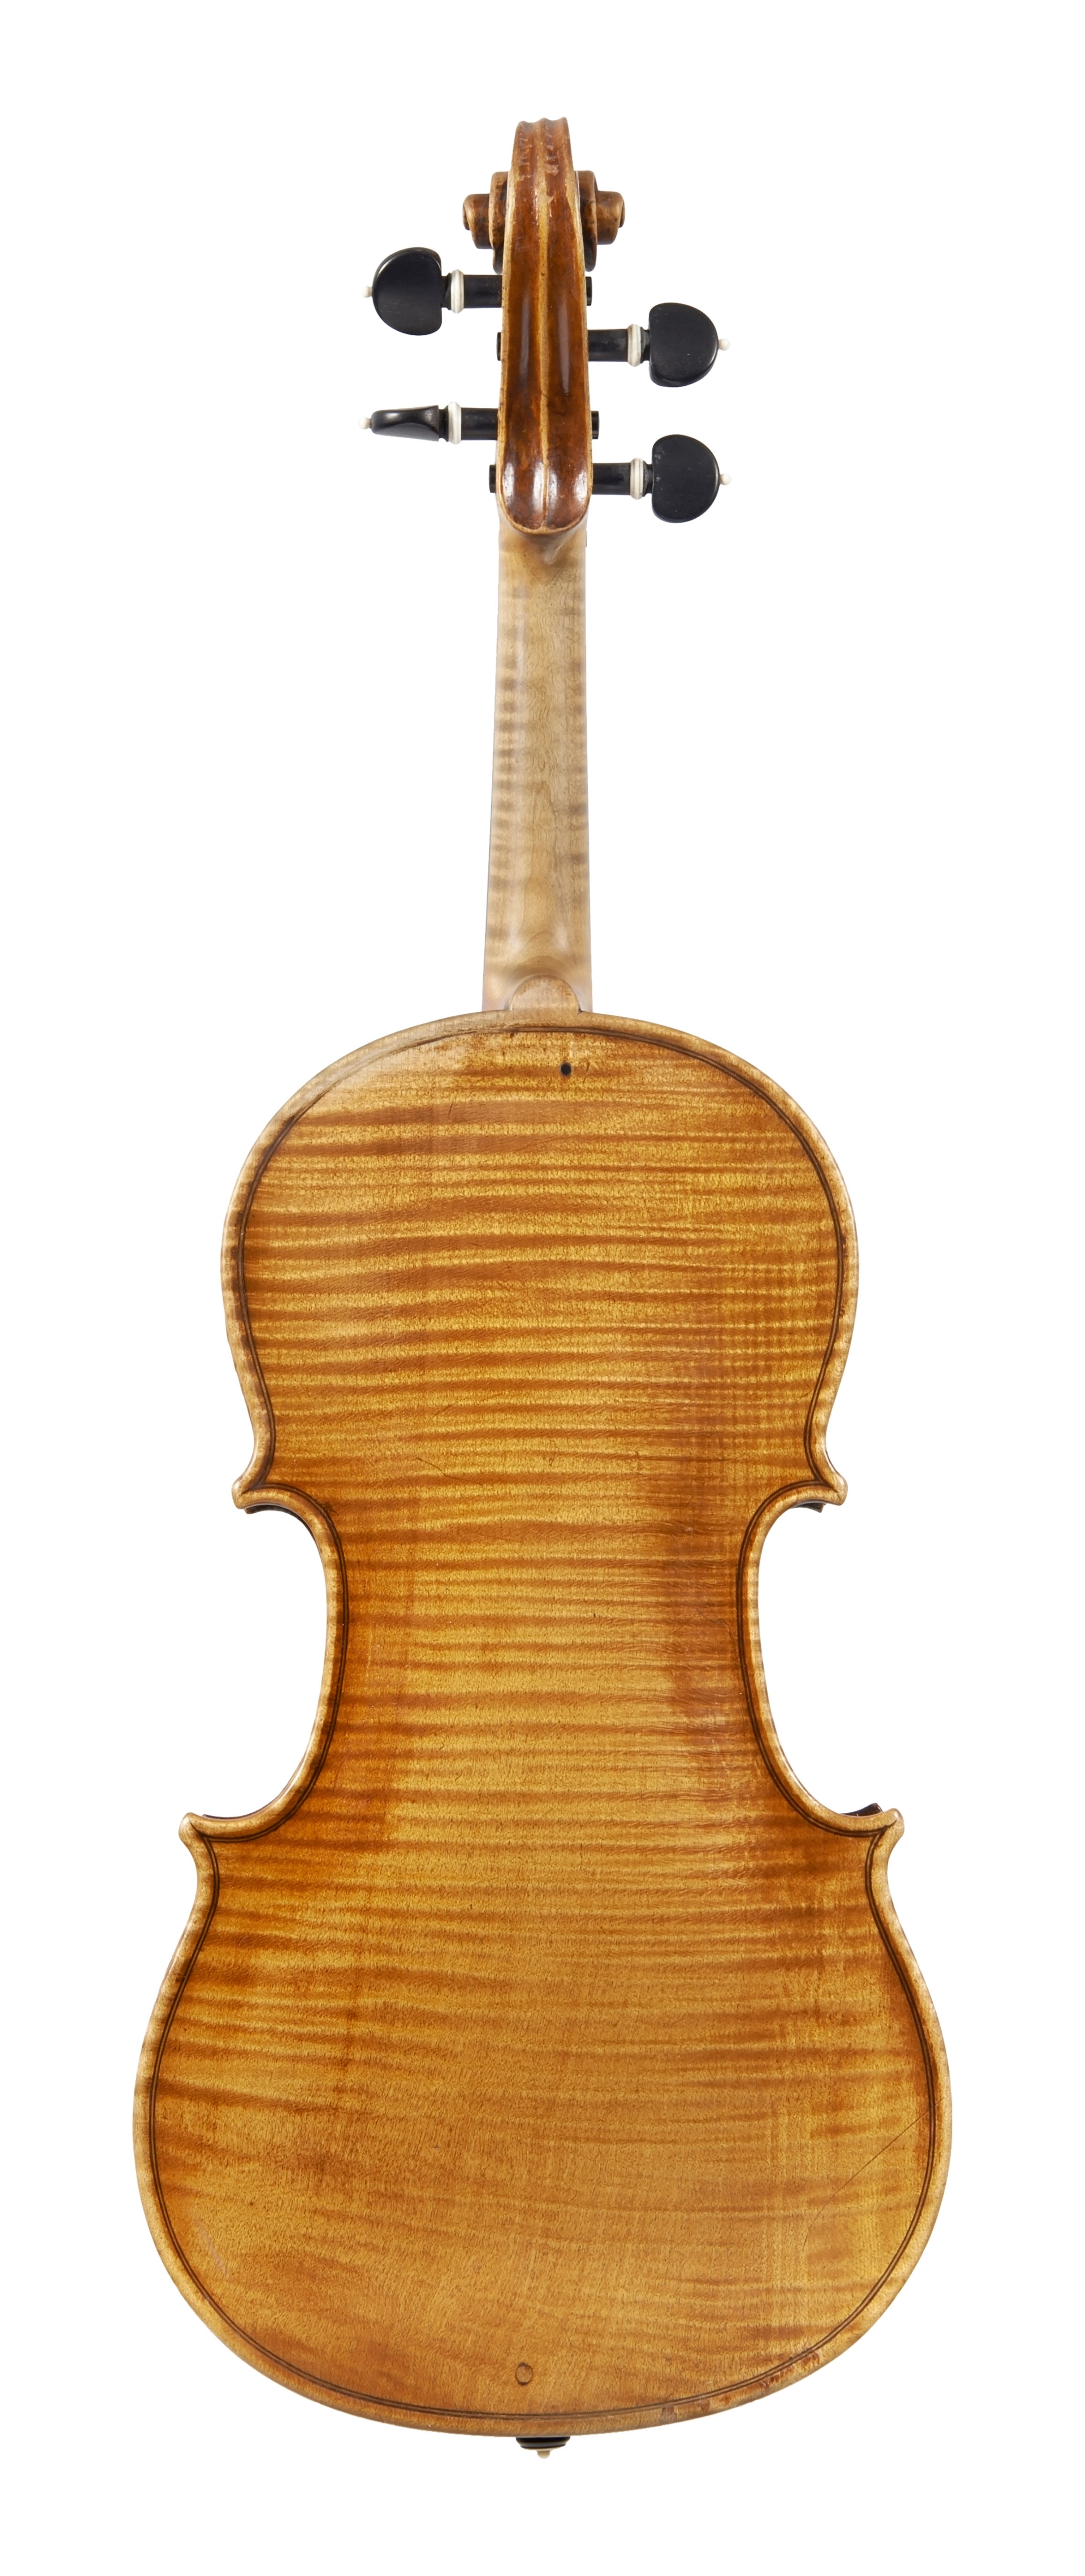 A violin by François Fent | Four Centuries Gallery | Ingles & Hayday